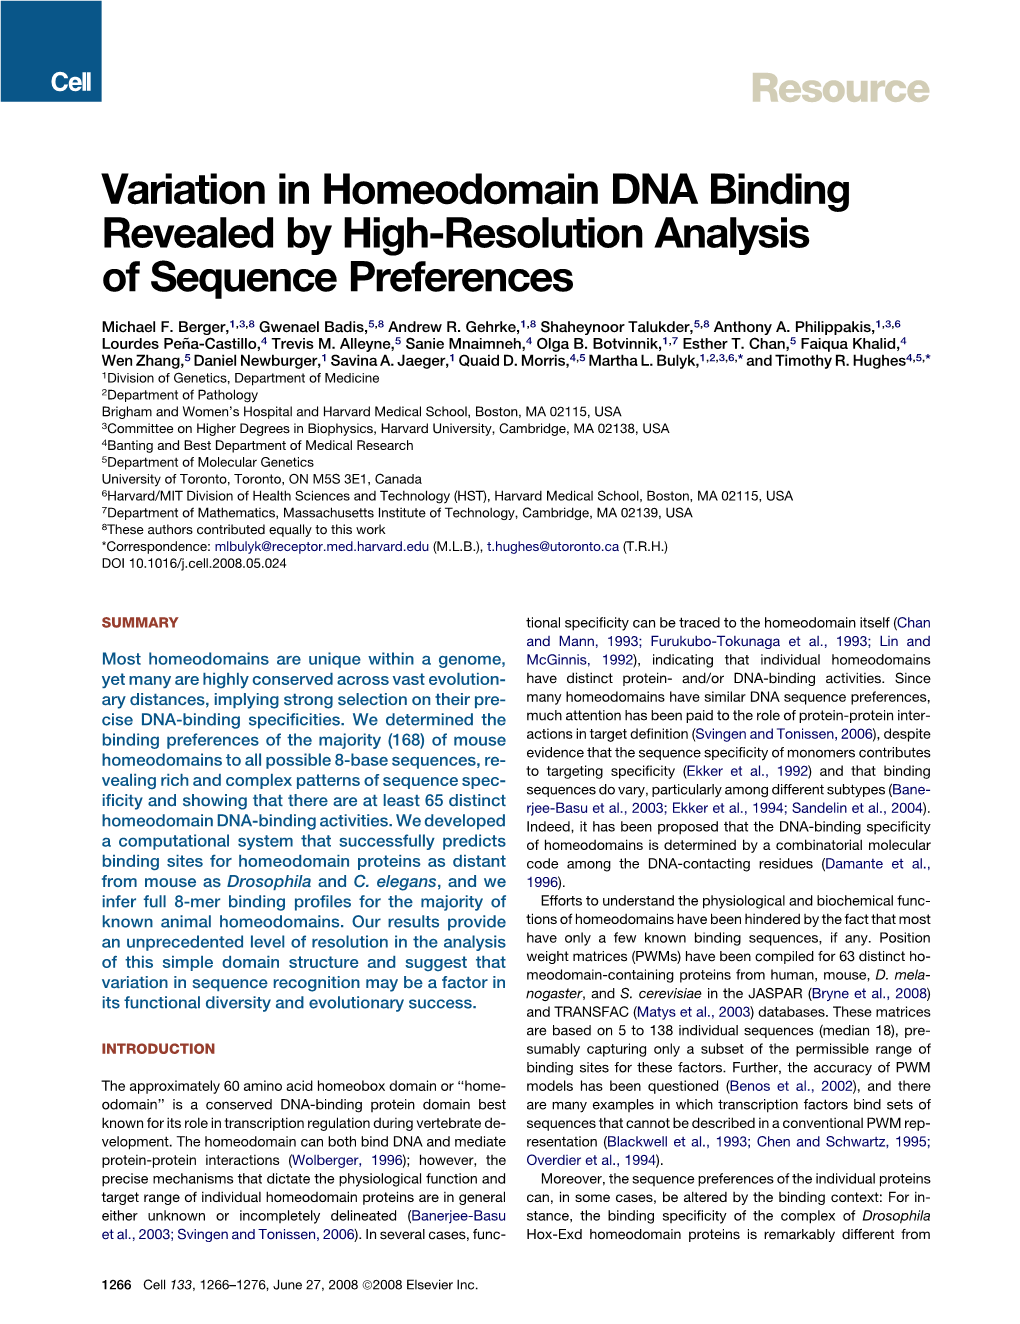 Variation in Homeodomain DNA Binding Revealed by High-Resolution Analysis of Sequence Preferences